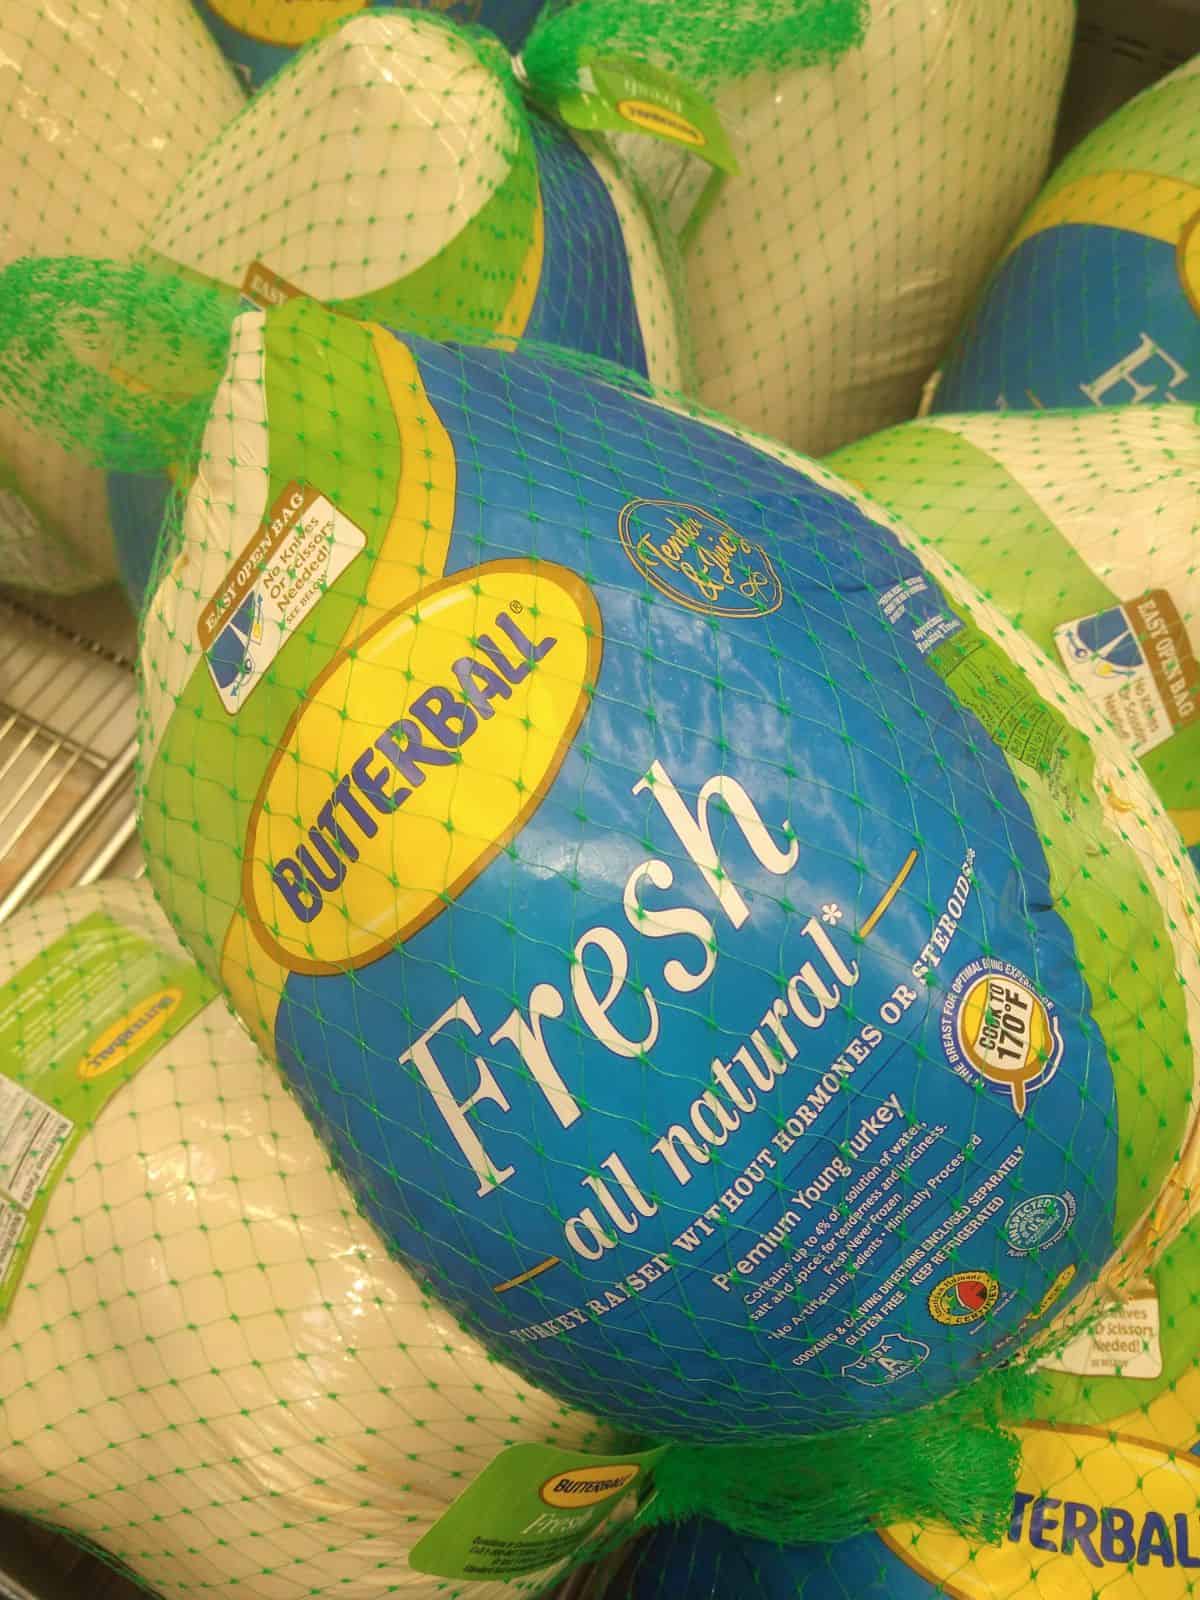 A close up of a display of Butterball Fresh Turkeys at Costco in 2022.